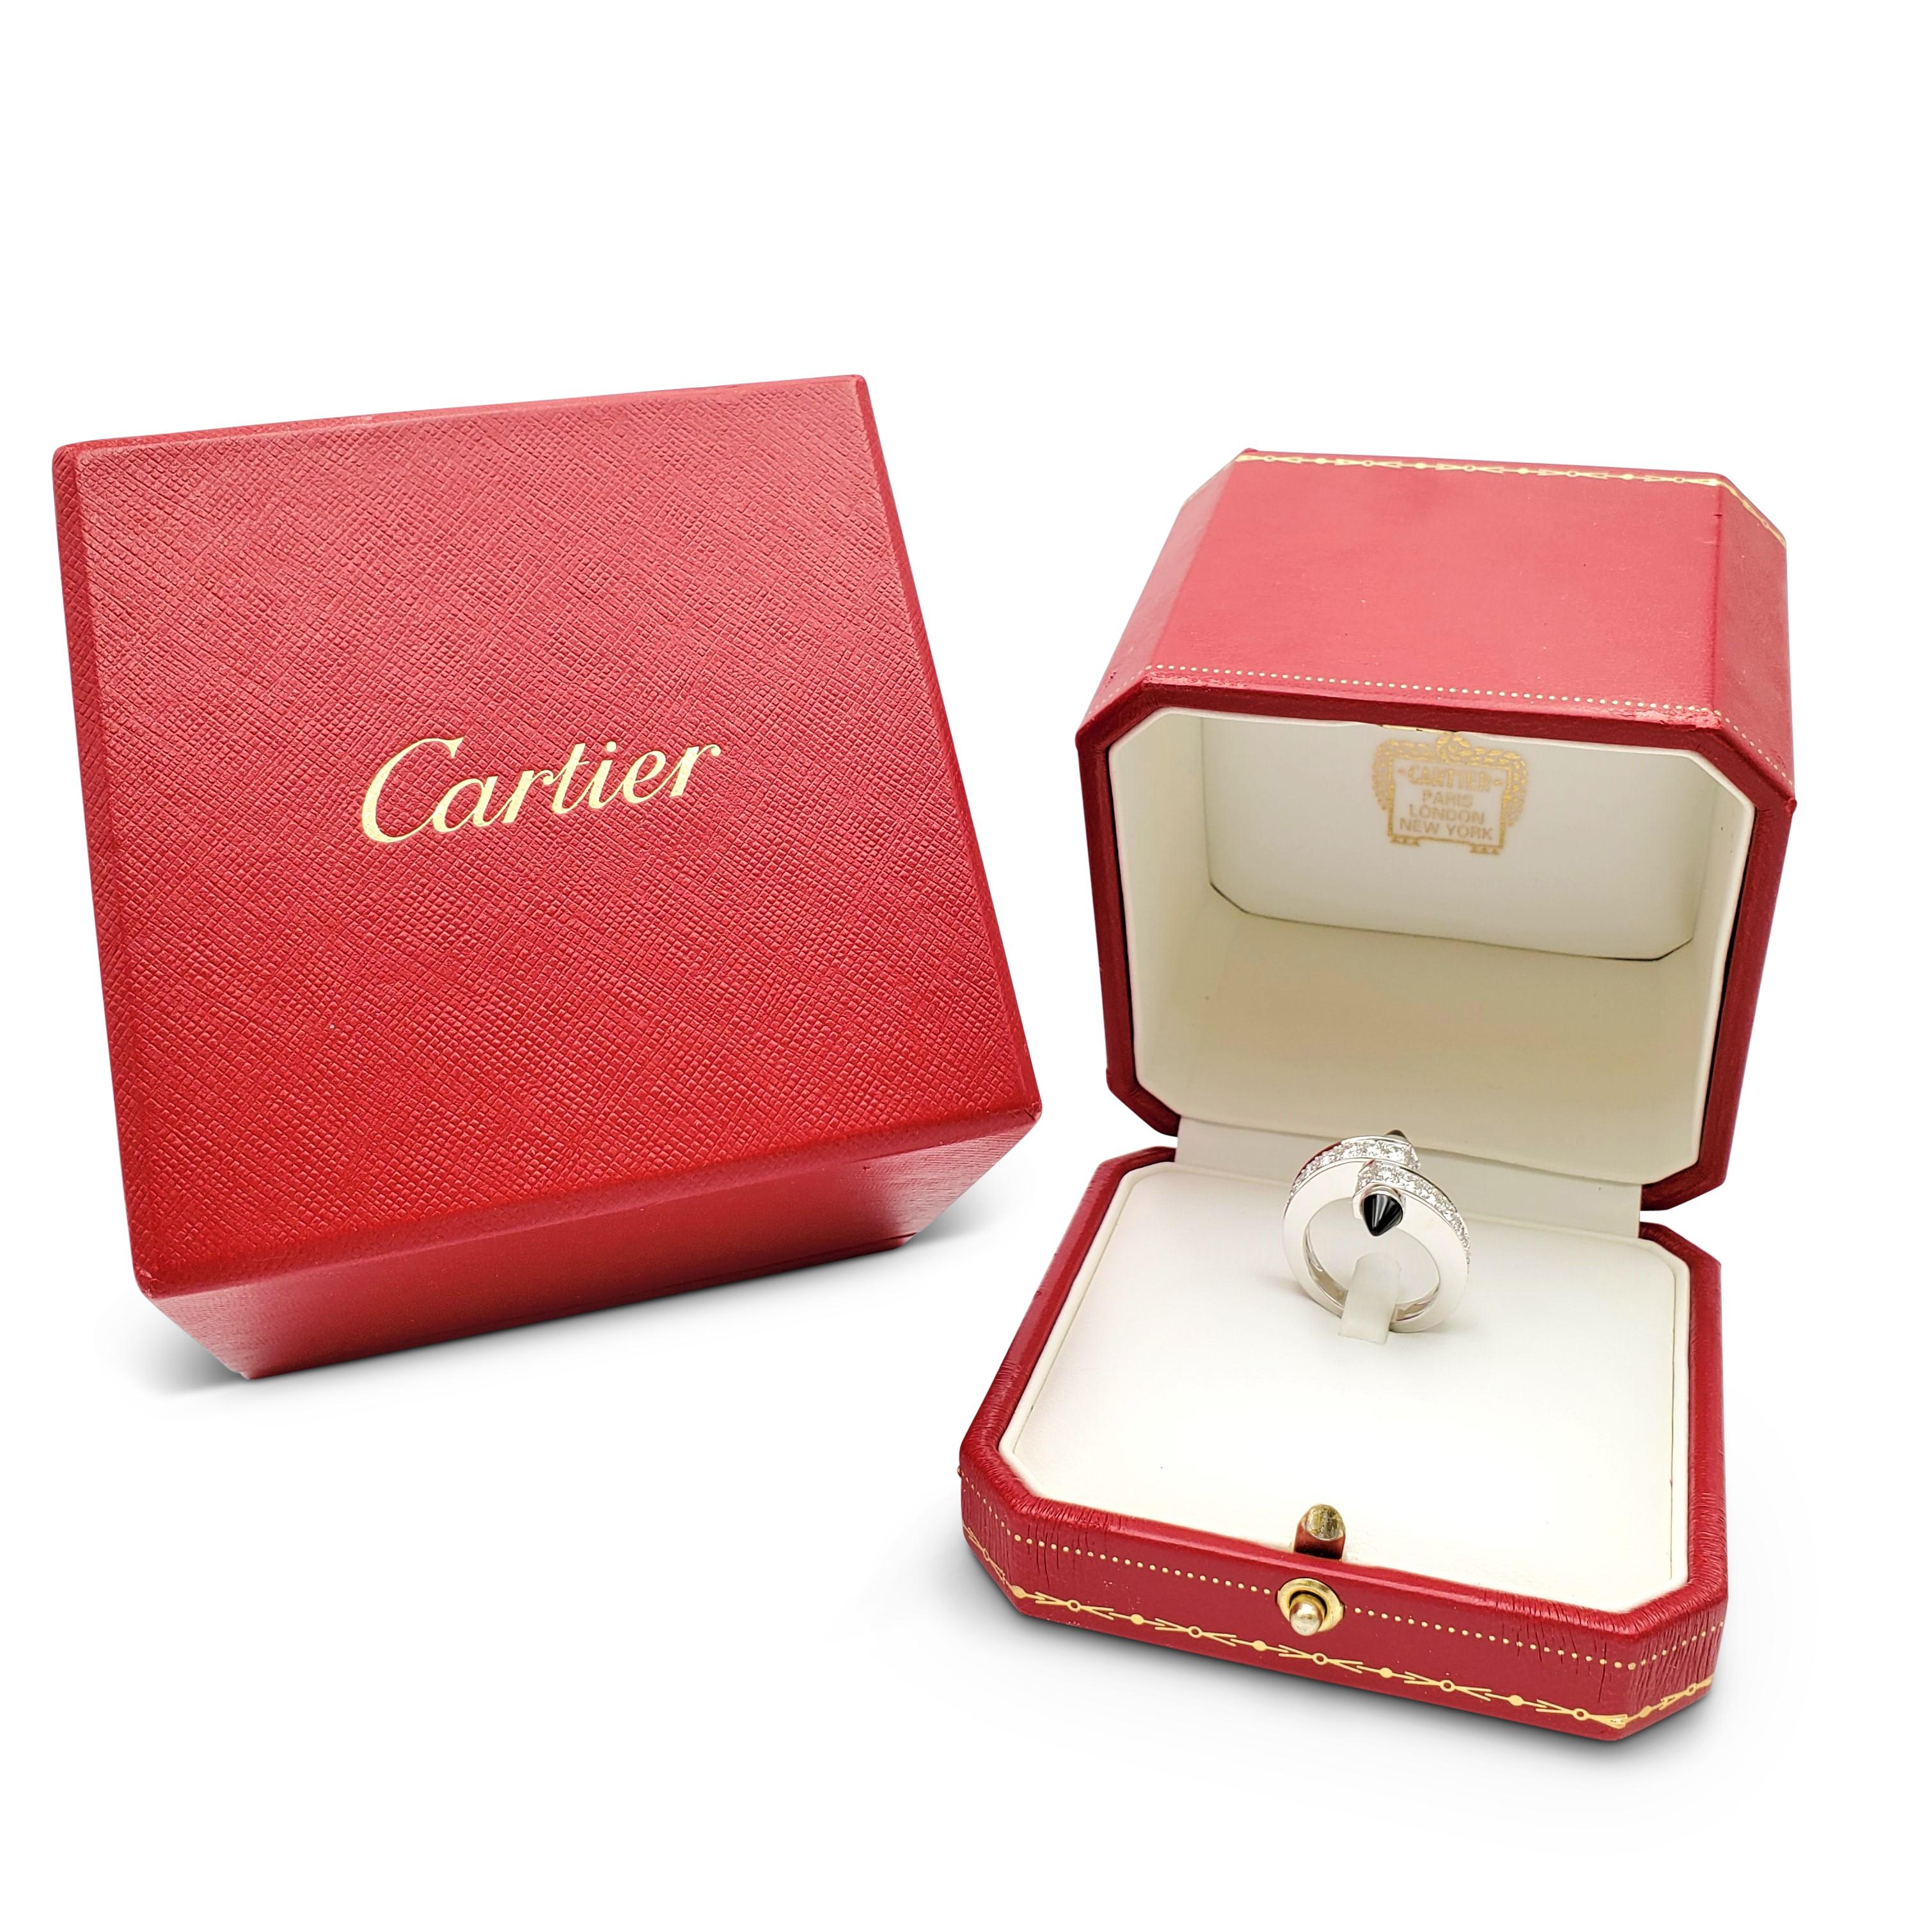 Cartier 'Menotte' White Gold Diamond and Onyx Bypass Ring 2